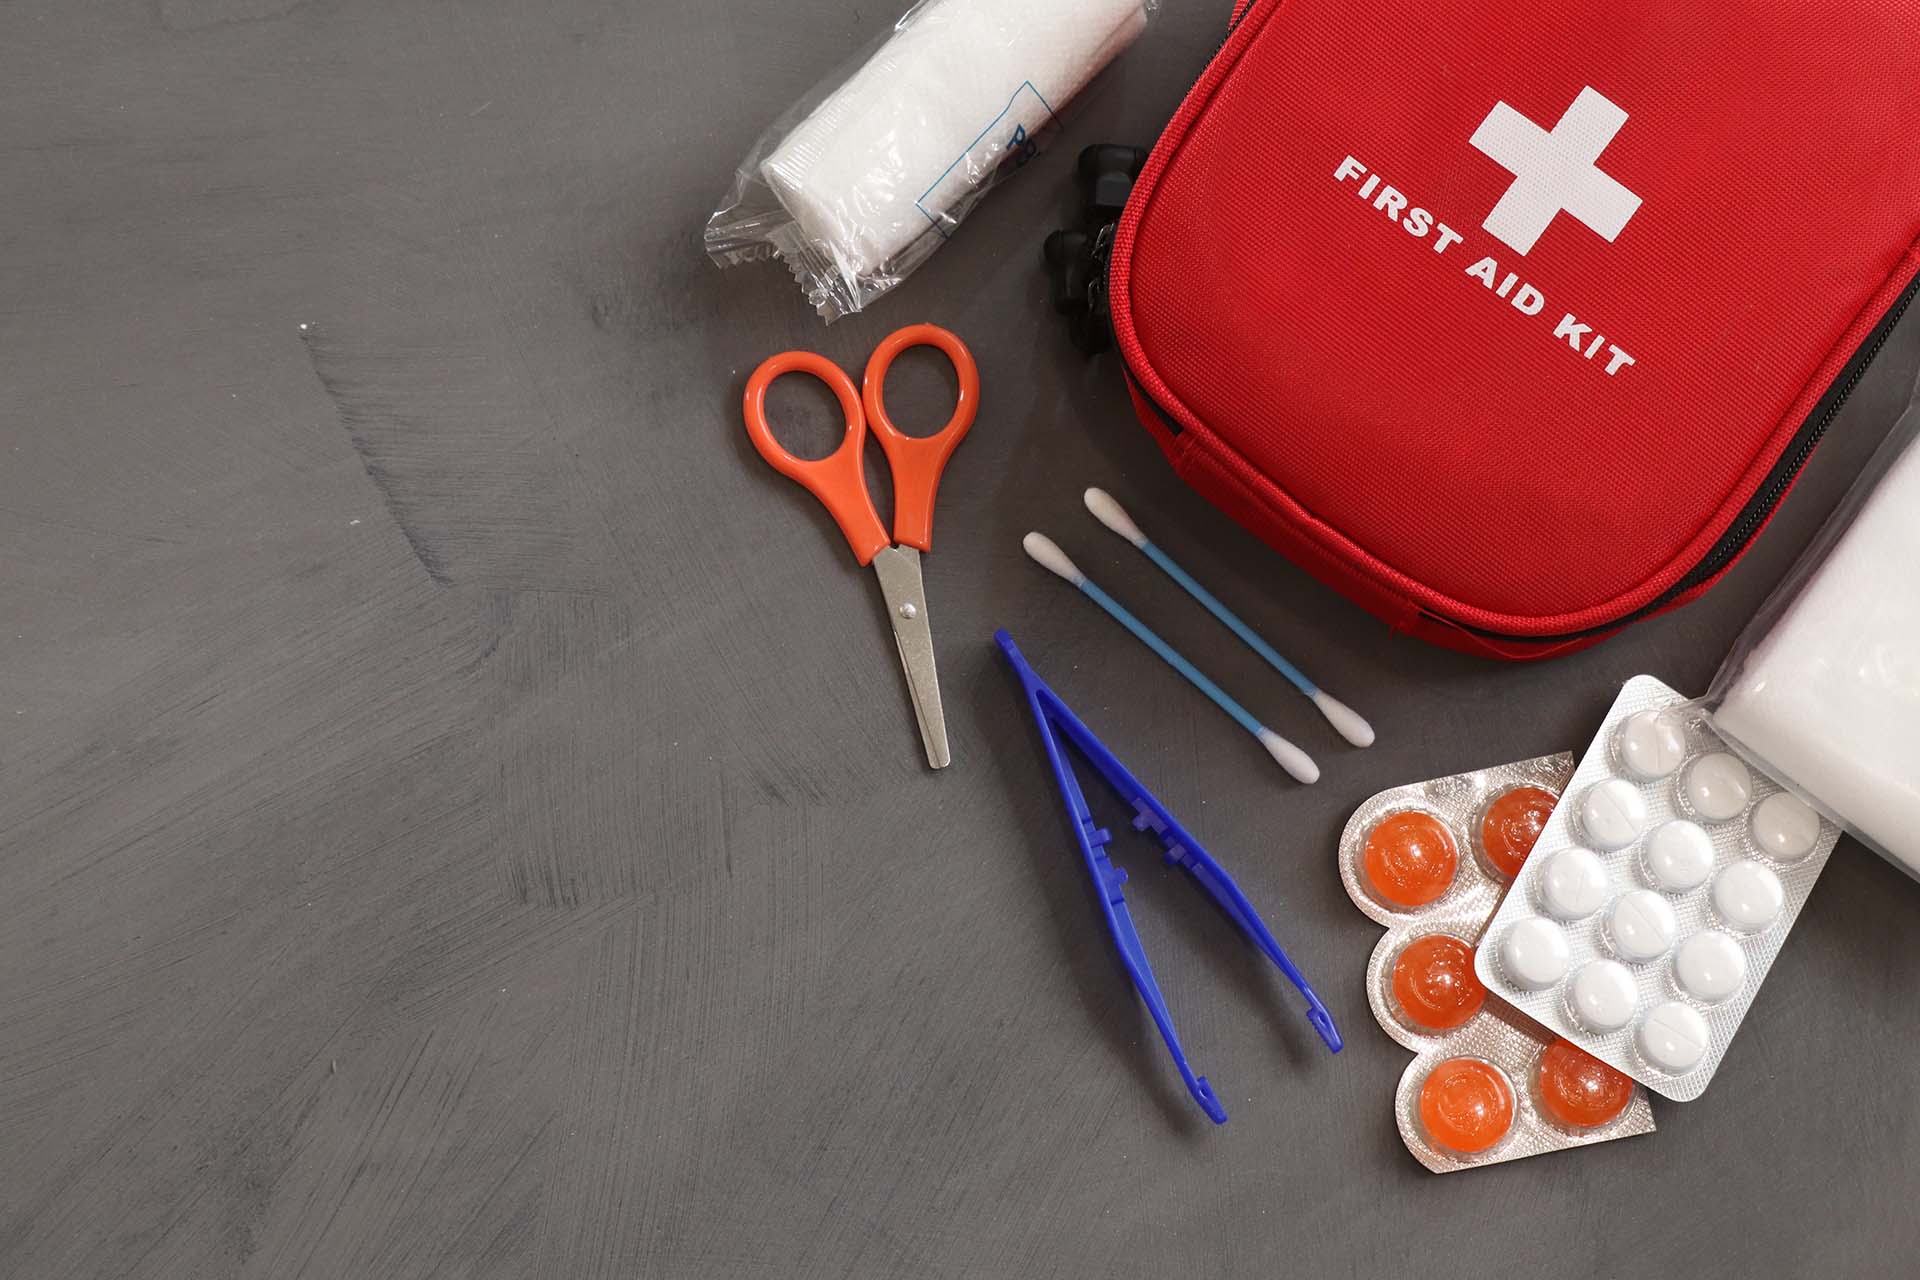 First aid kit on a gray surface  